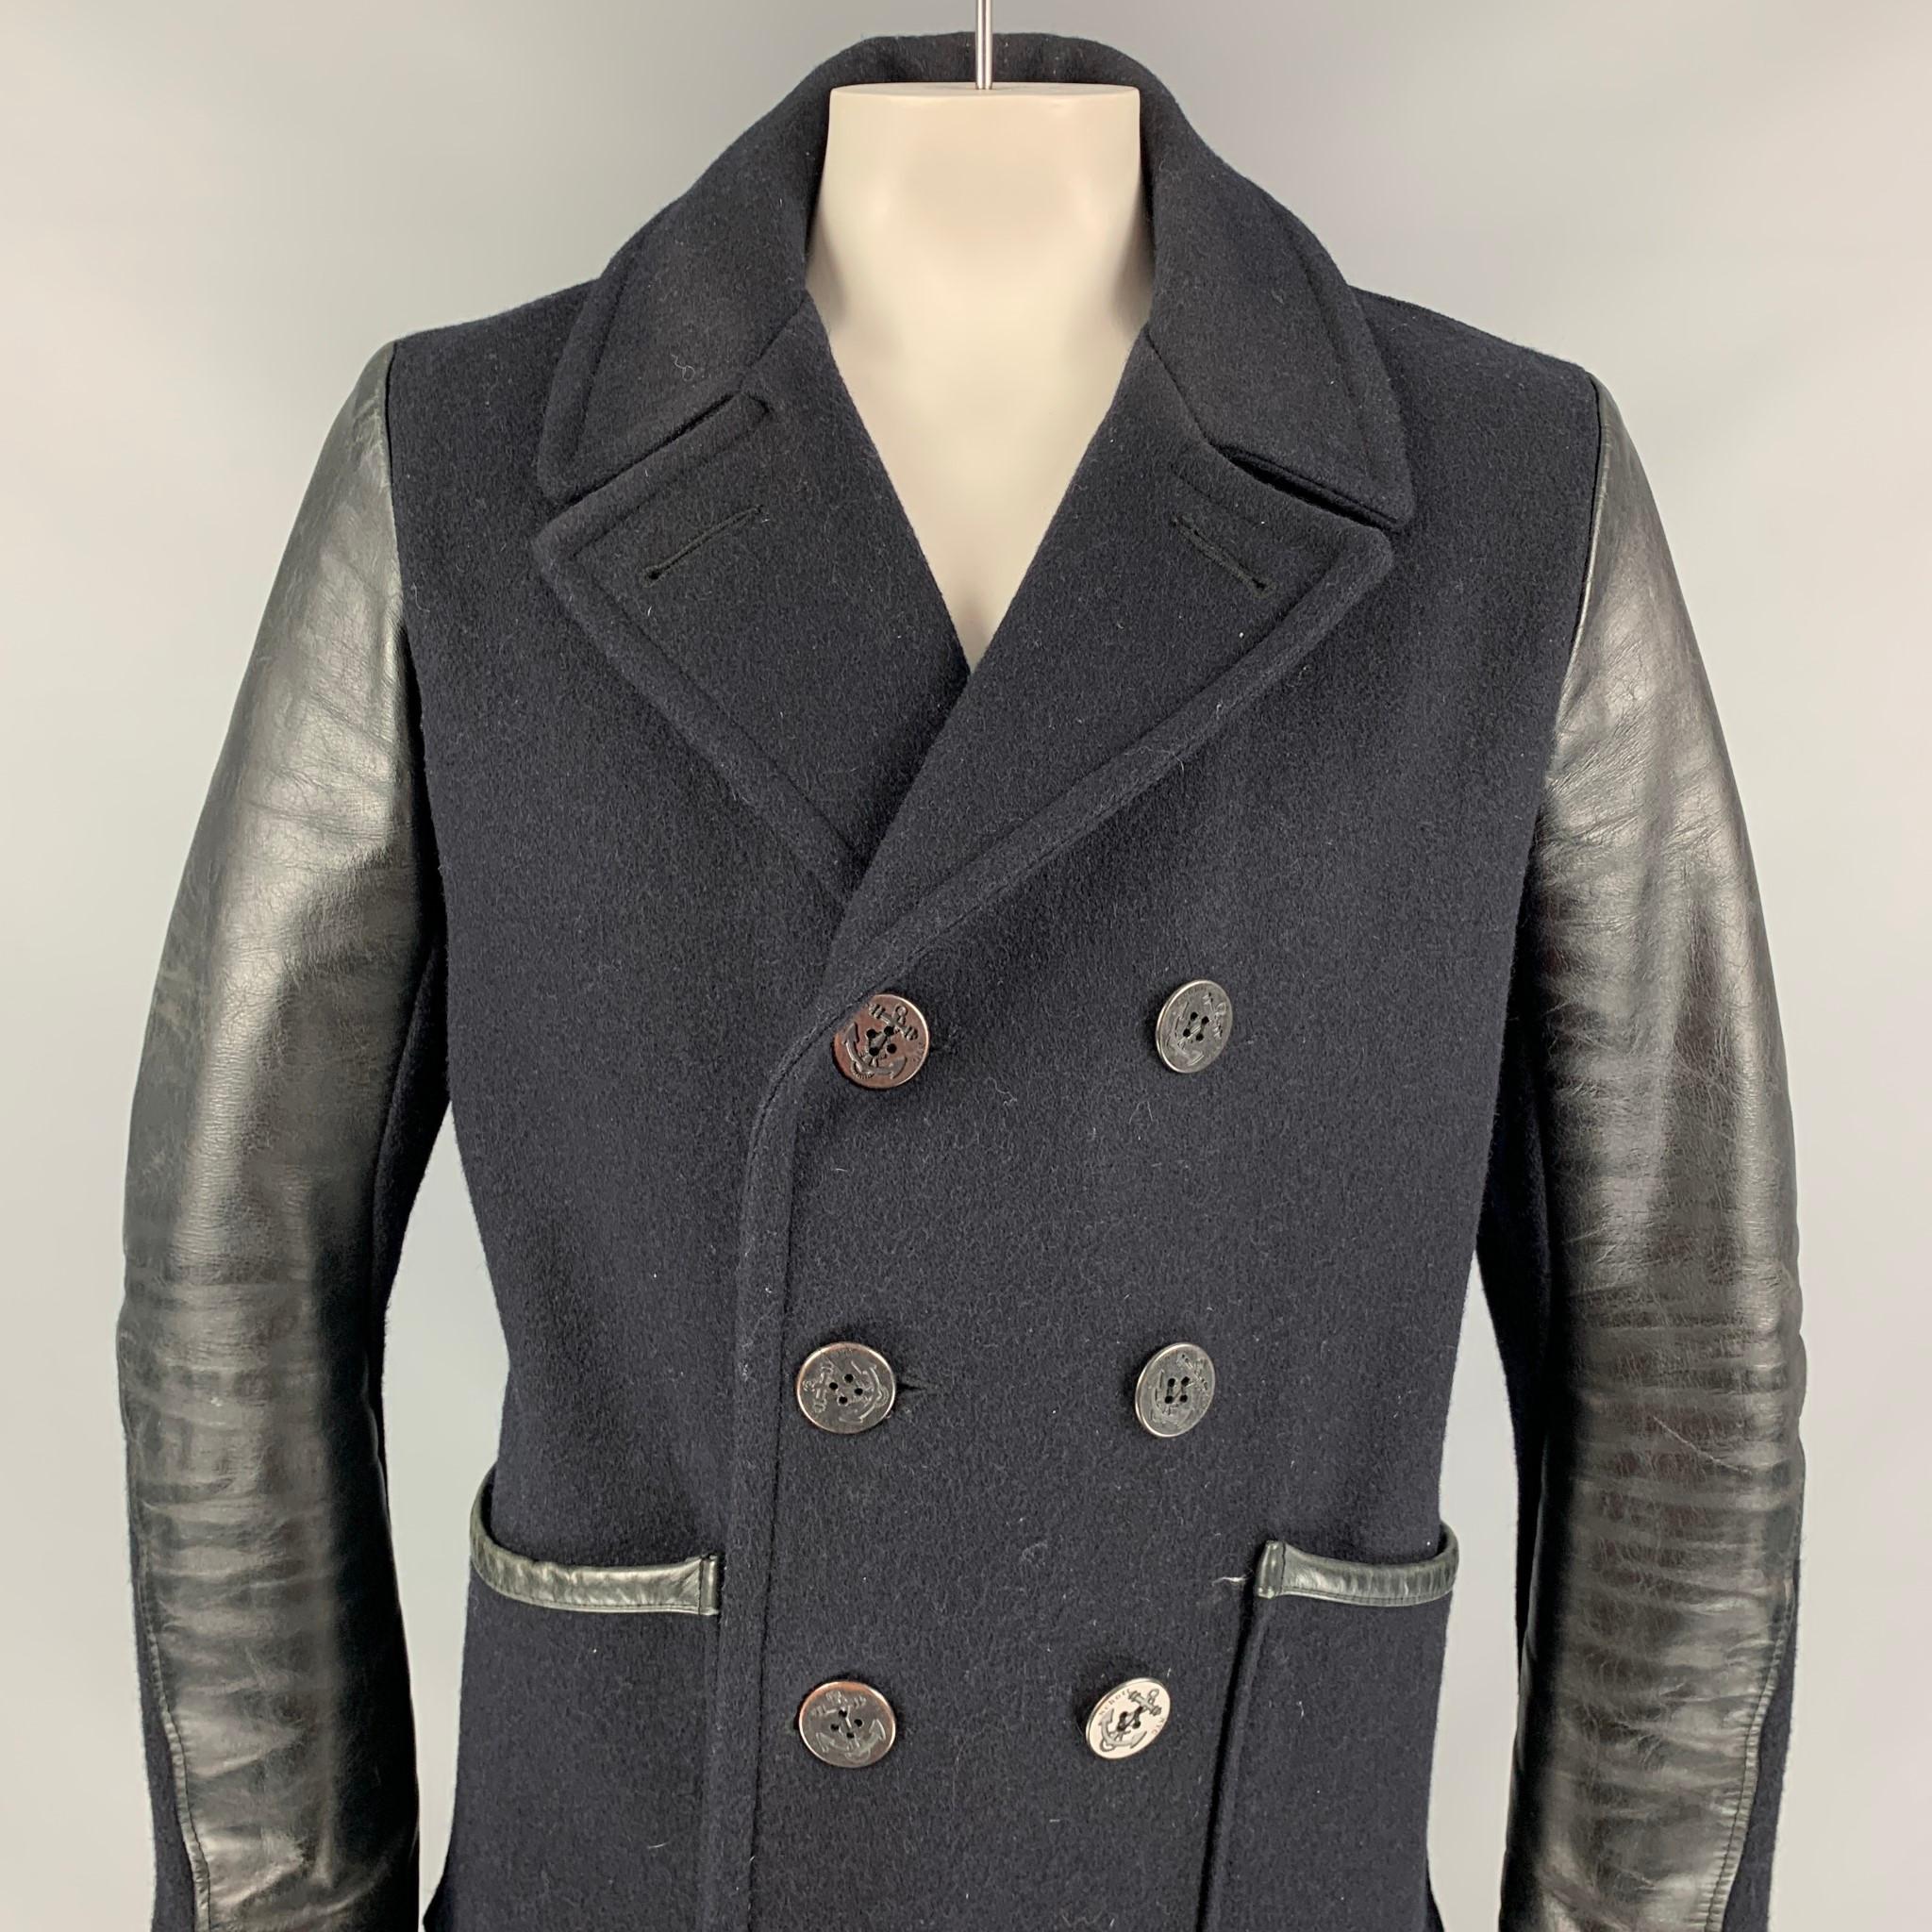 SCHOTT pea coat comes in a black material with a full liner featuring leather sleeves, patch pockets, and a double breasted closure. Made in Canada. 

Good Pre-Owned Condition.
Marked: L

Measurements:

Shoulder: 18.5 in.
Chest: 44 in.
Sleeve: 26